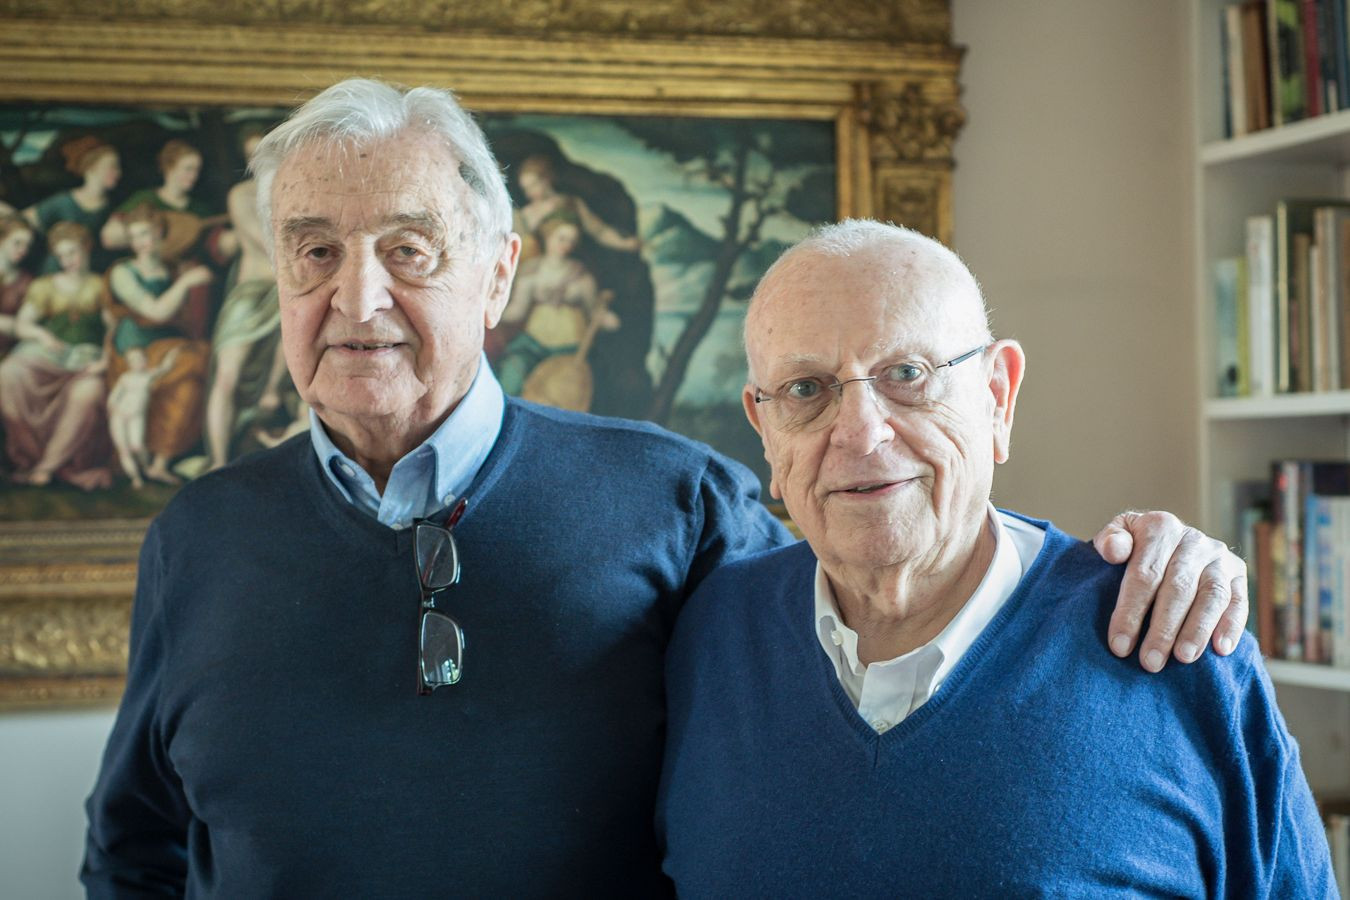 Guiseppe Cinnirella, right, became secretary general during the Presidency of his friend, Francesco Gnecchi-Ruscone, left, in 1981 ©World Archery